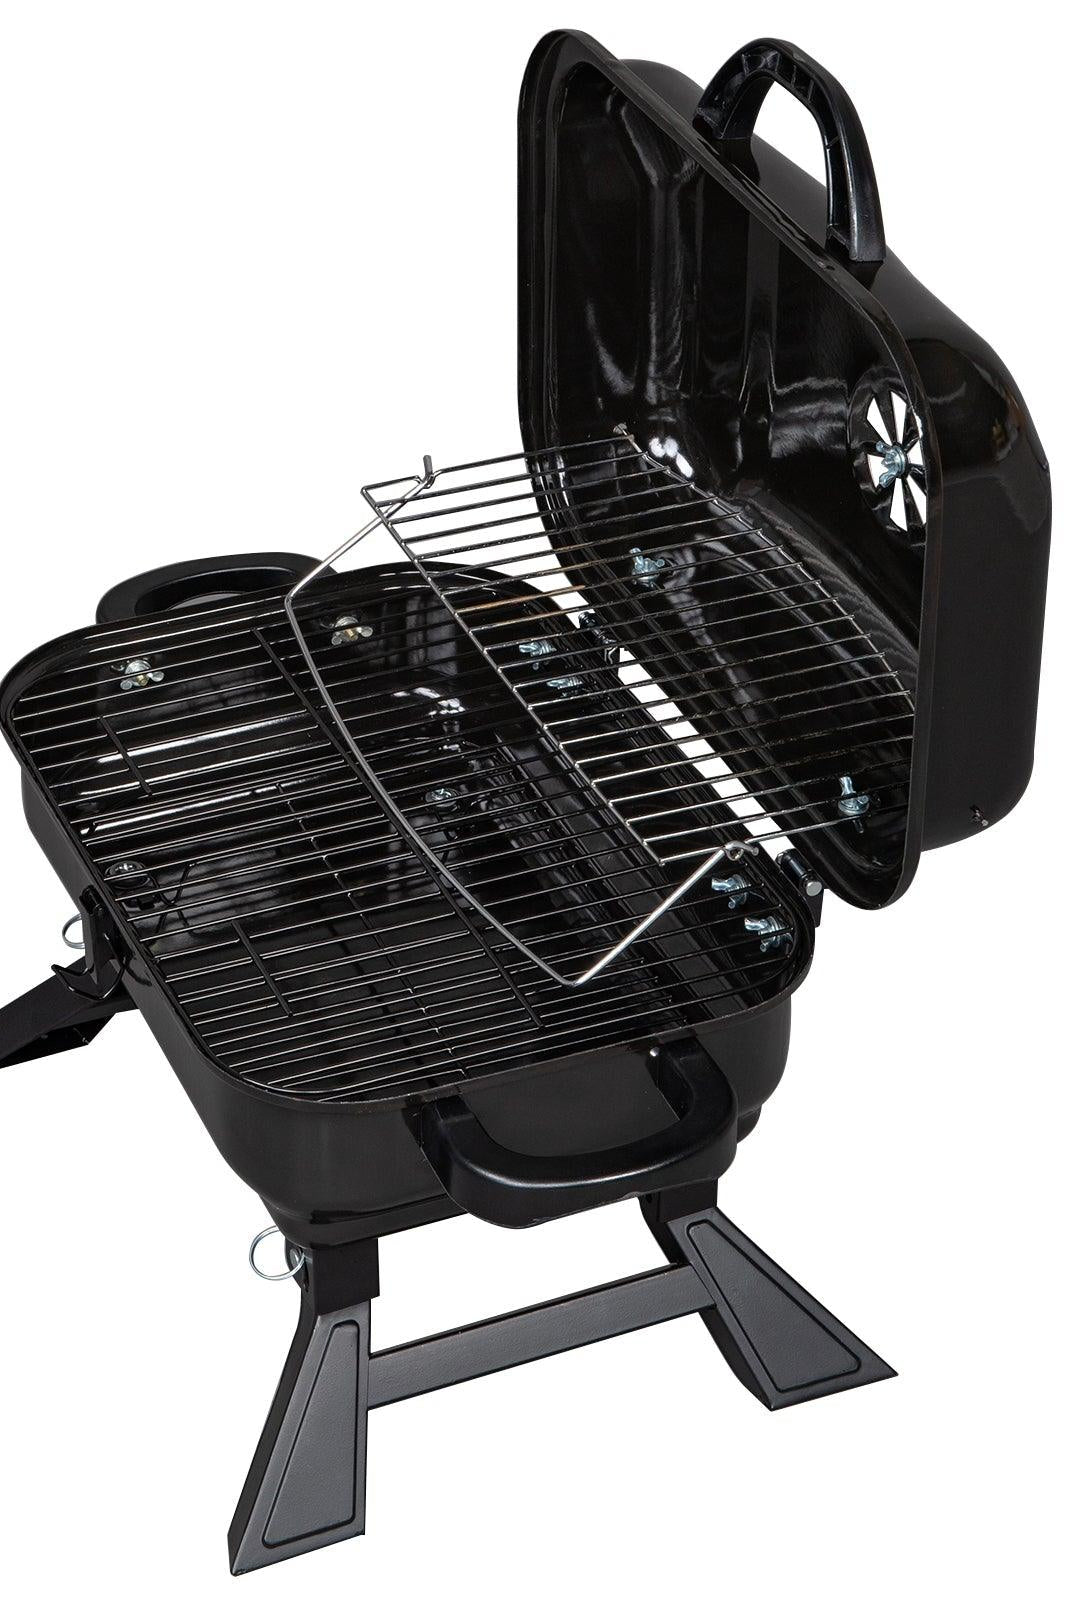 Outdoor Grabs Portable Tabletop Bbq Charcoal Grill Outdoor Camping Gear